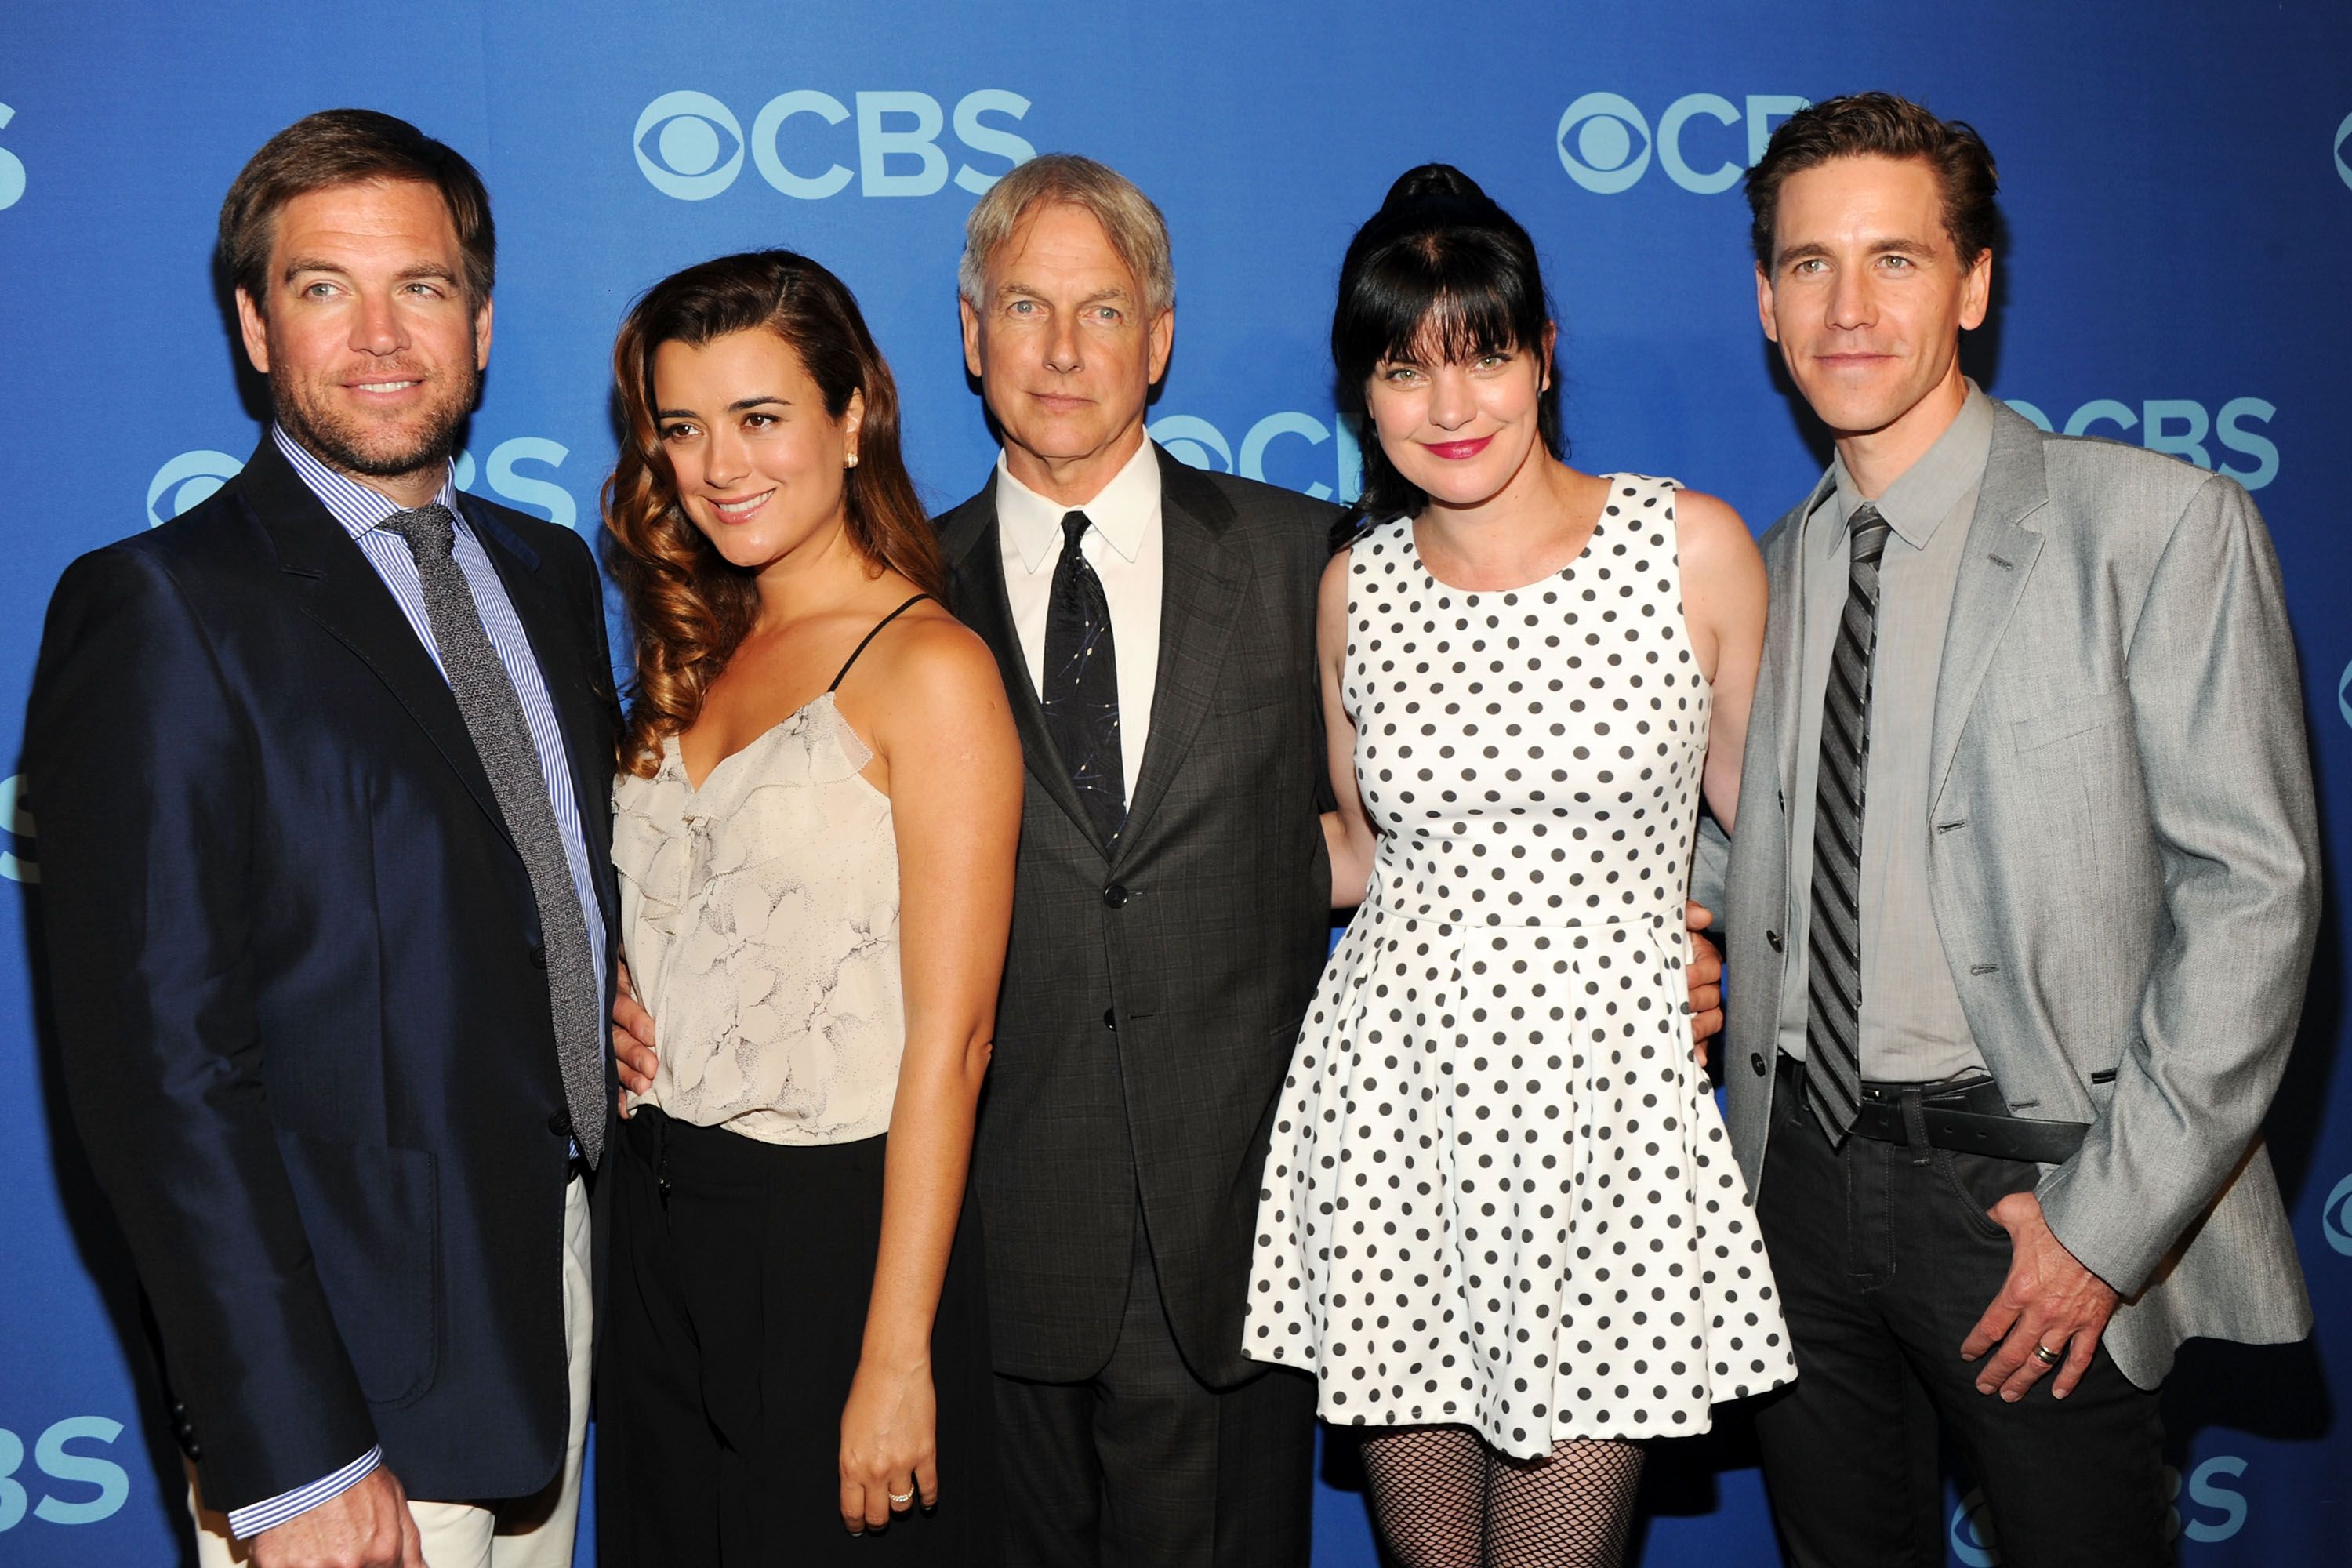 The cast of "NCIS" at CBS 2013 Upfront Presentation at The Tent at Lincoln Center on May 15, 2013 in New York City | Photo: Getty Images